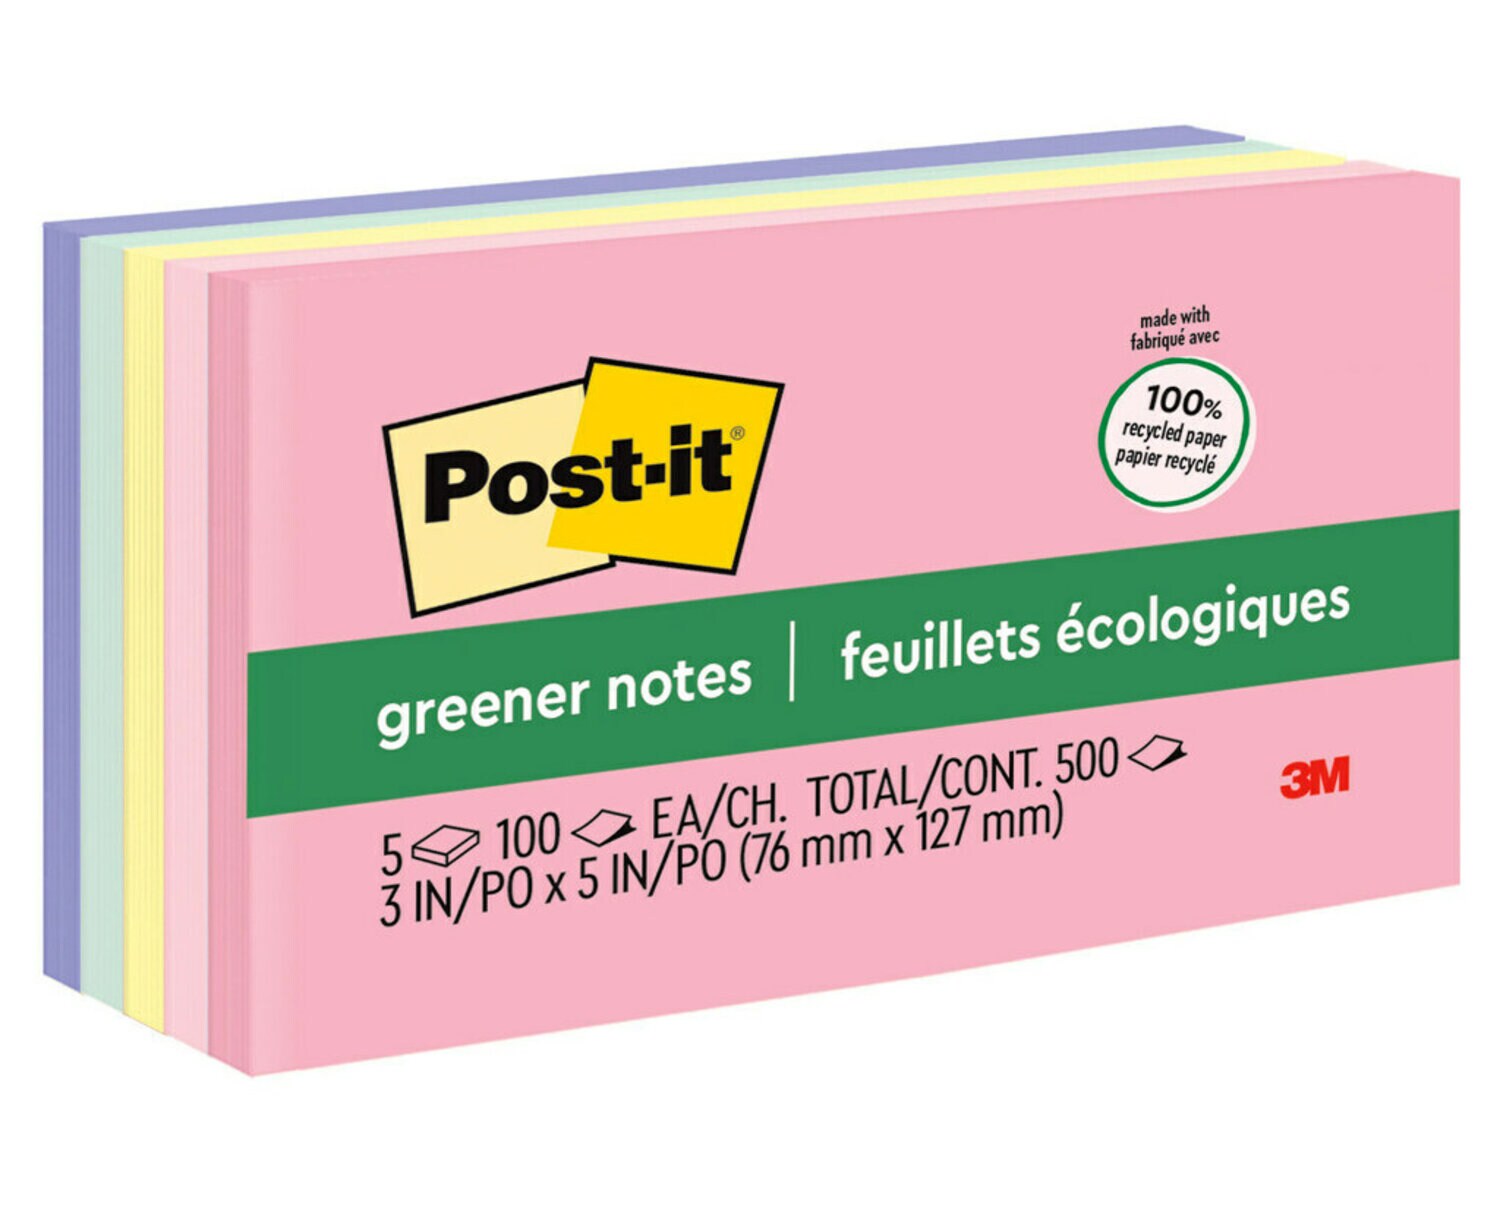 7100243773 - Post-it Greener Notes 655-RP-A, 3 in x 5 in (76 mm x 127 mm) Helsinki Colors